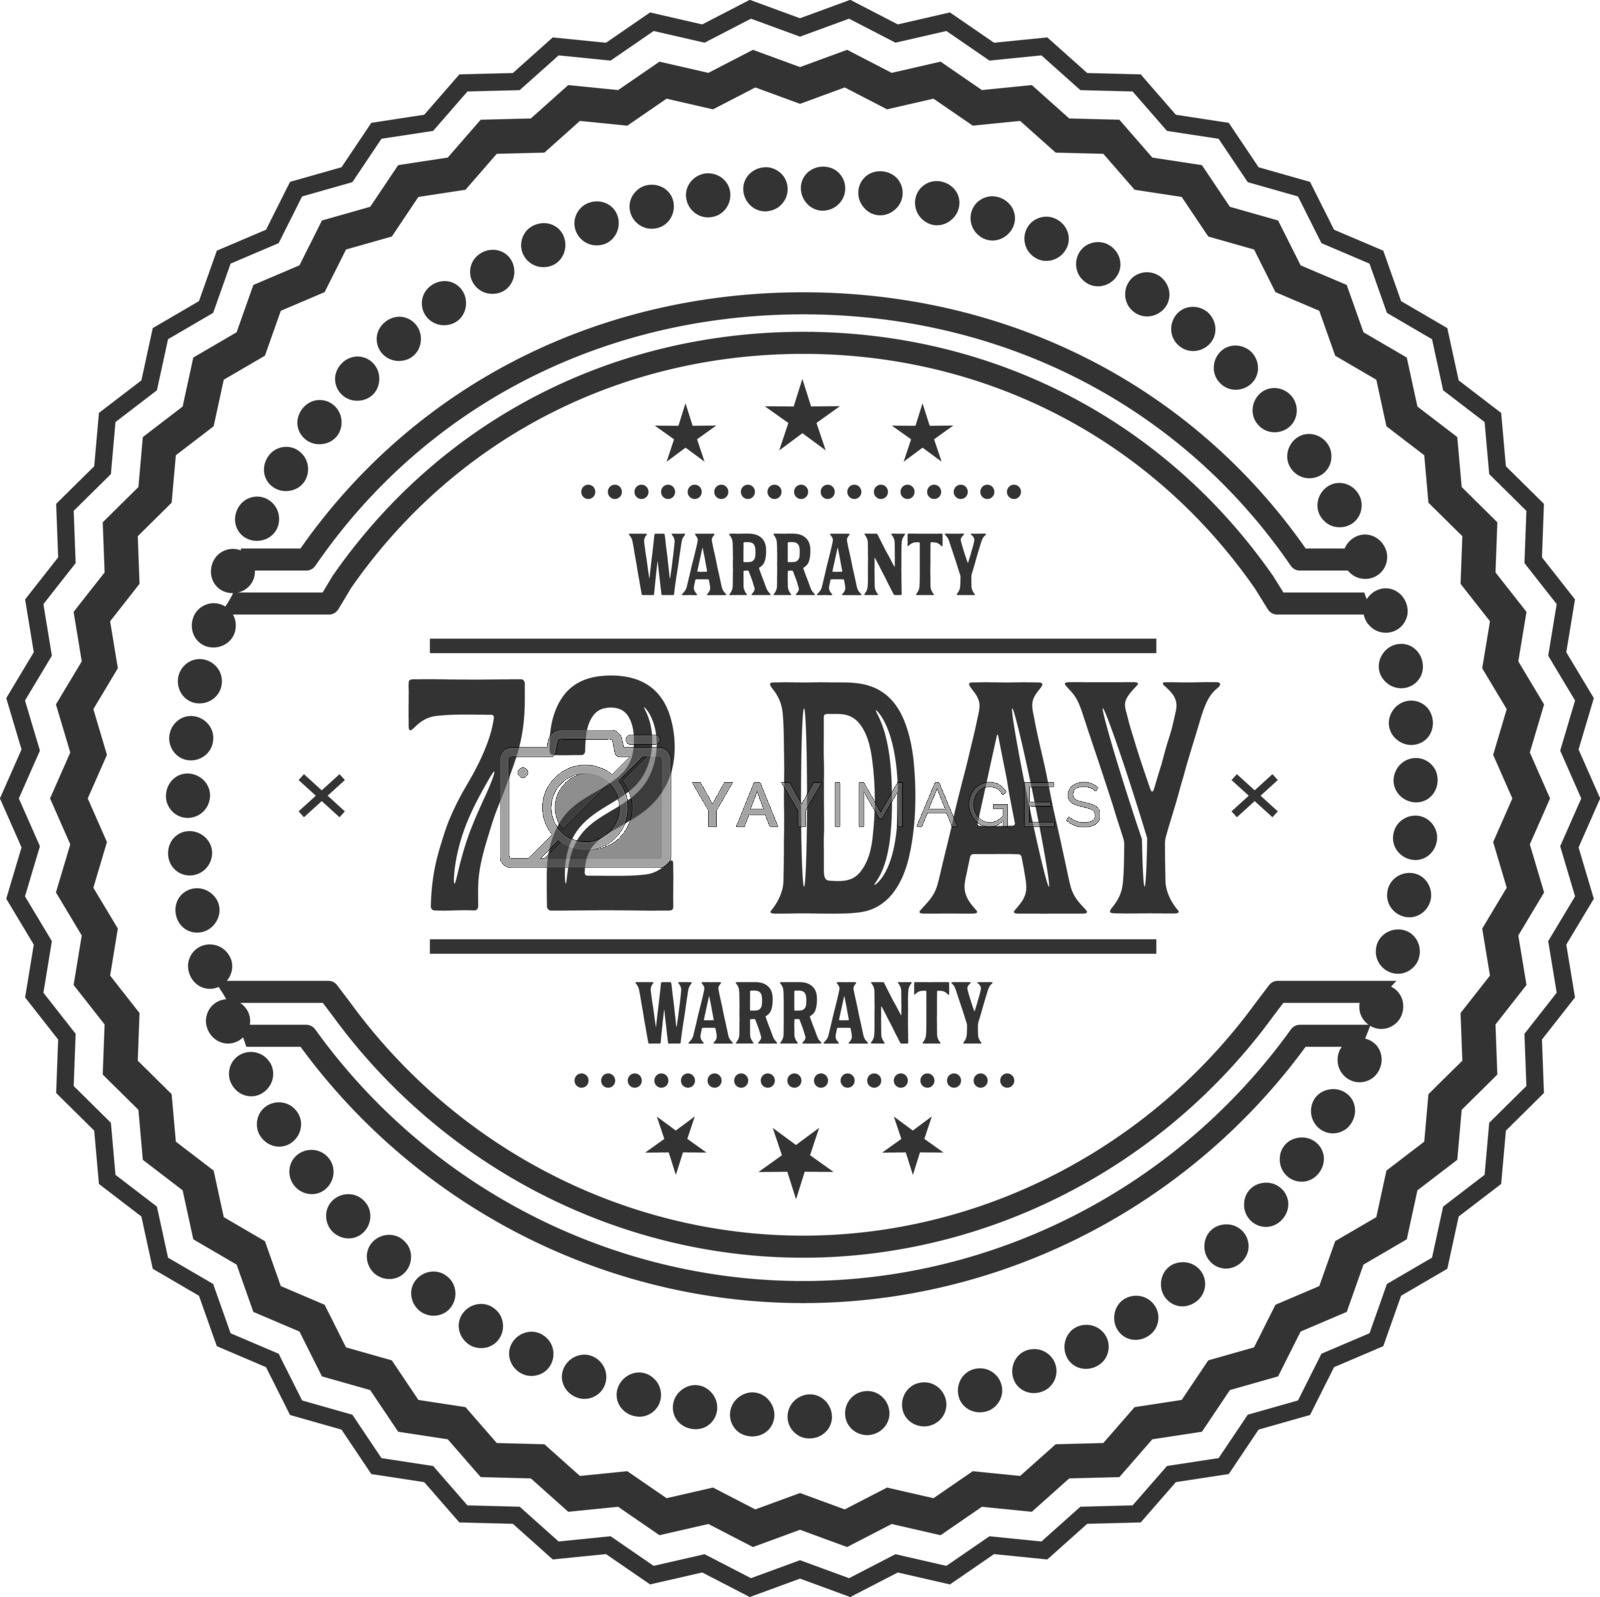 Royalty free image of 72 days warranty icon by teguh_jam@yahoo.com